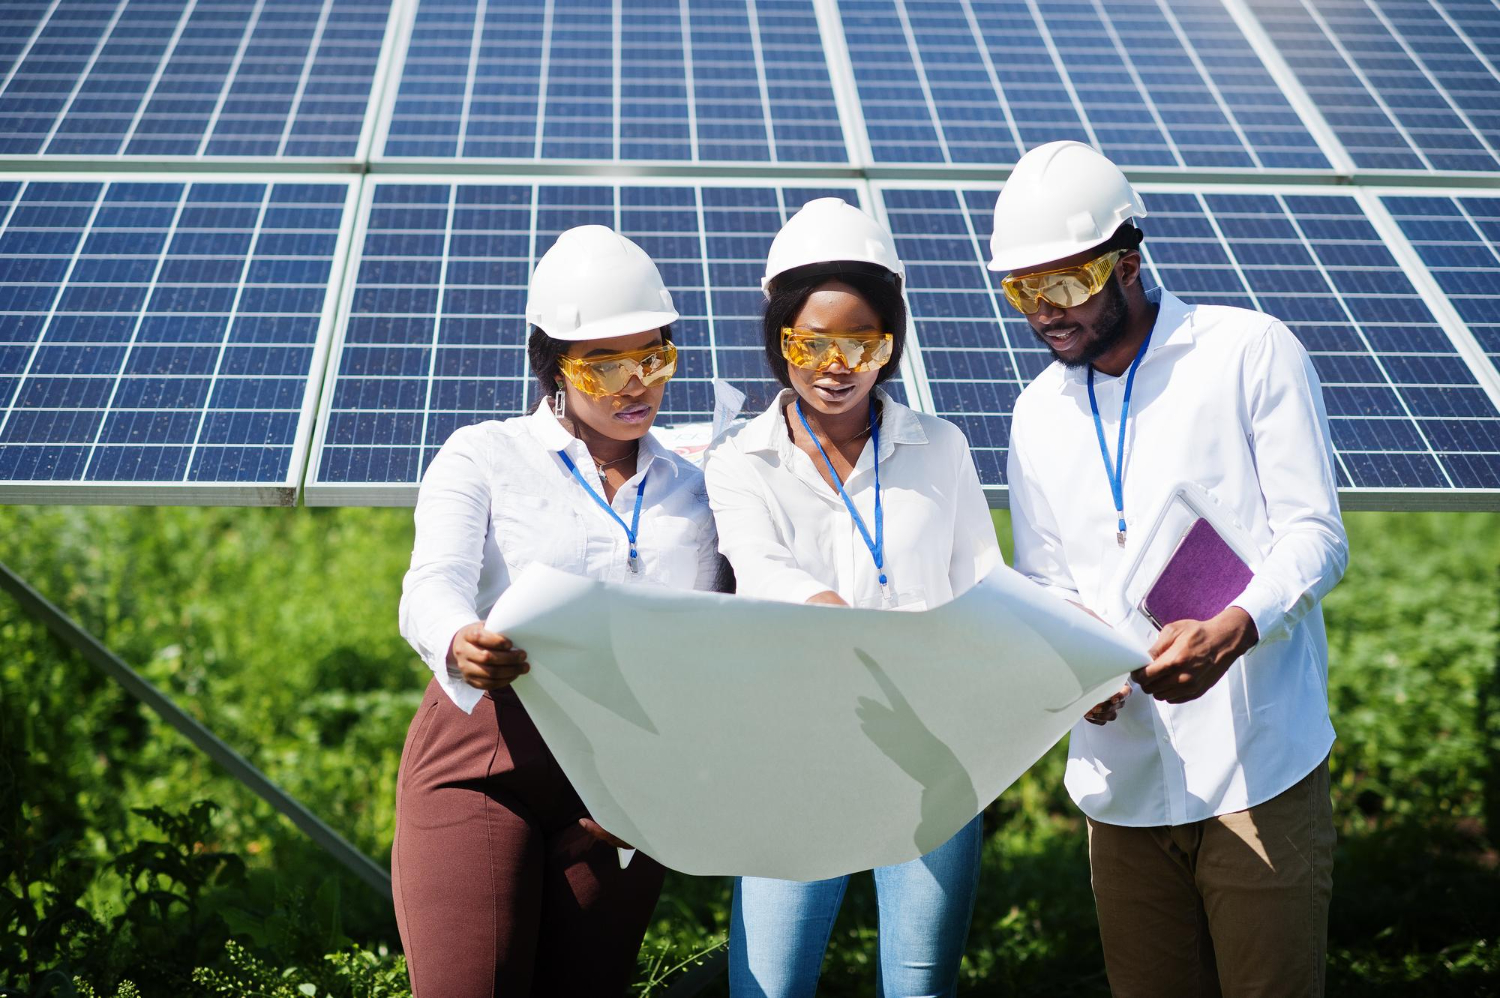 Implementing energy-saving practices with solar panels